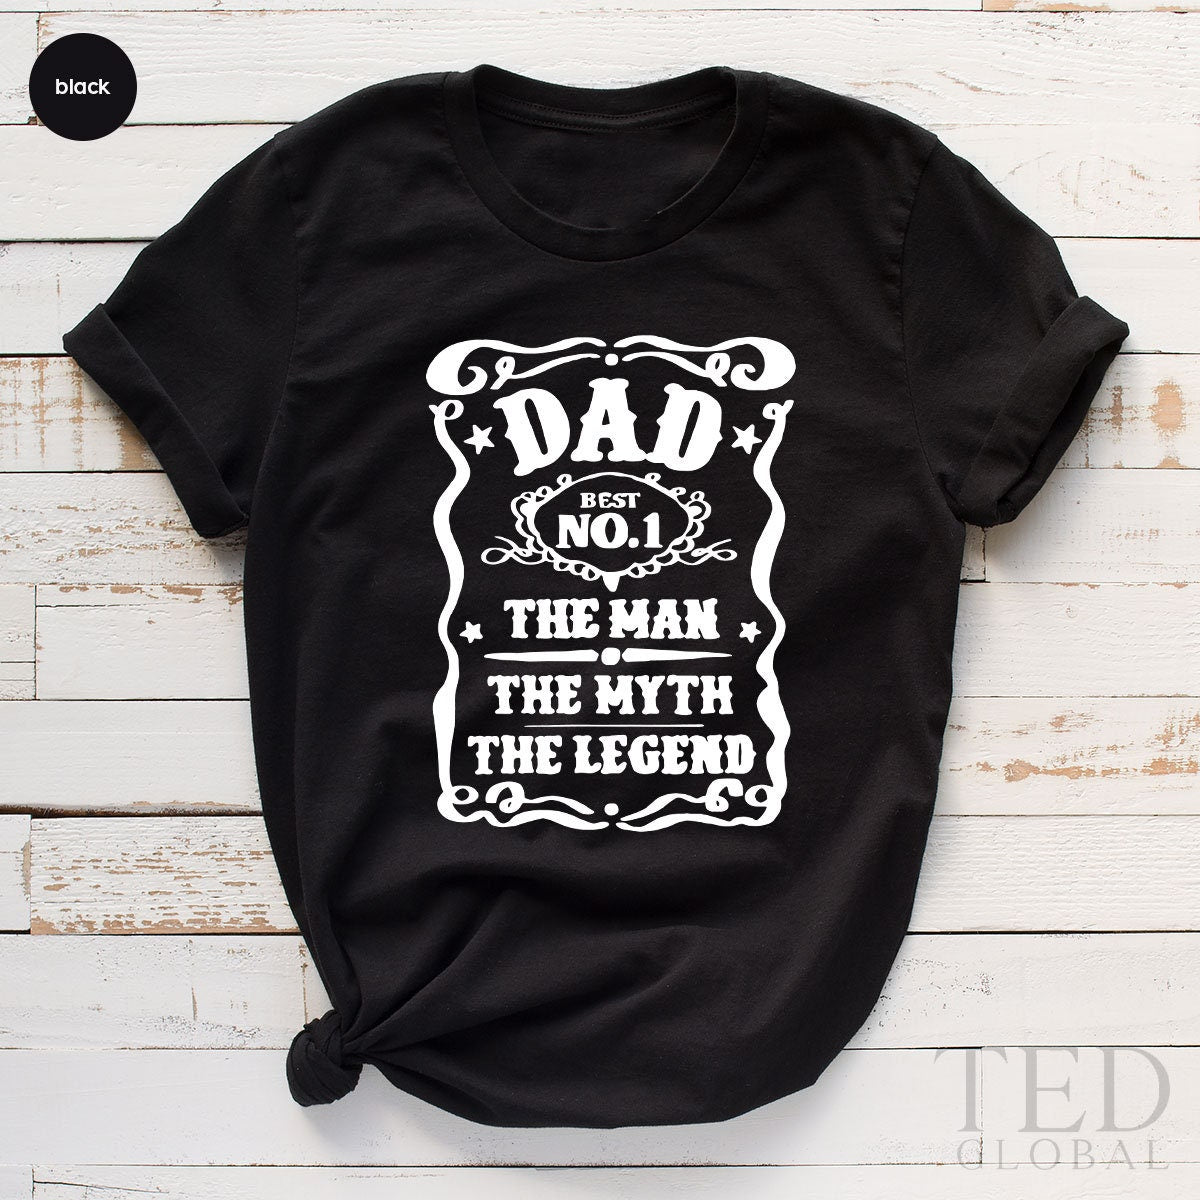 Funny Dad Shirt, Fathers Day Tee, Gift For Dad, Dad Shirt, Best Dad Sh –